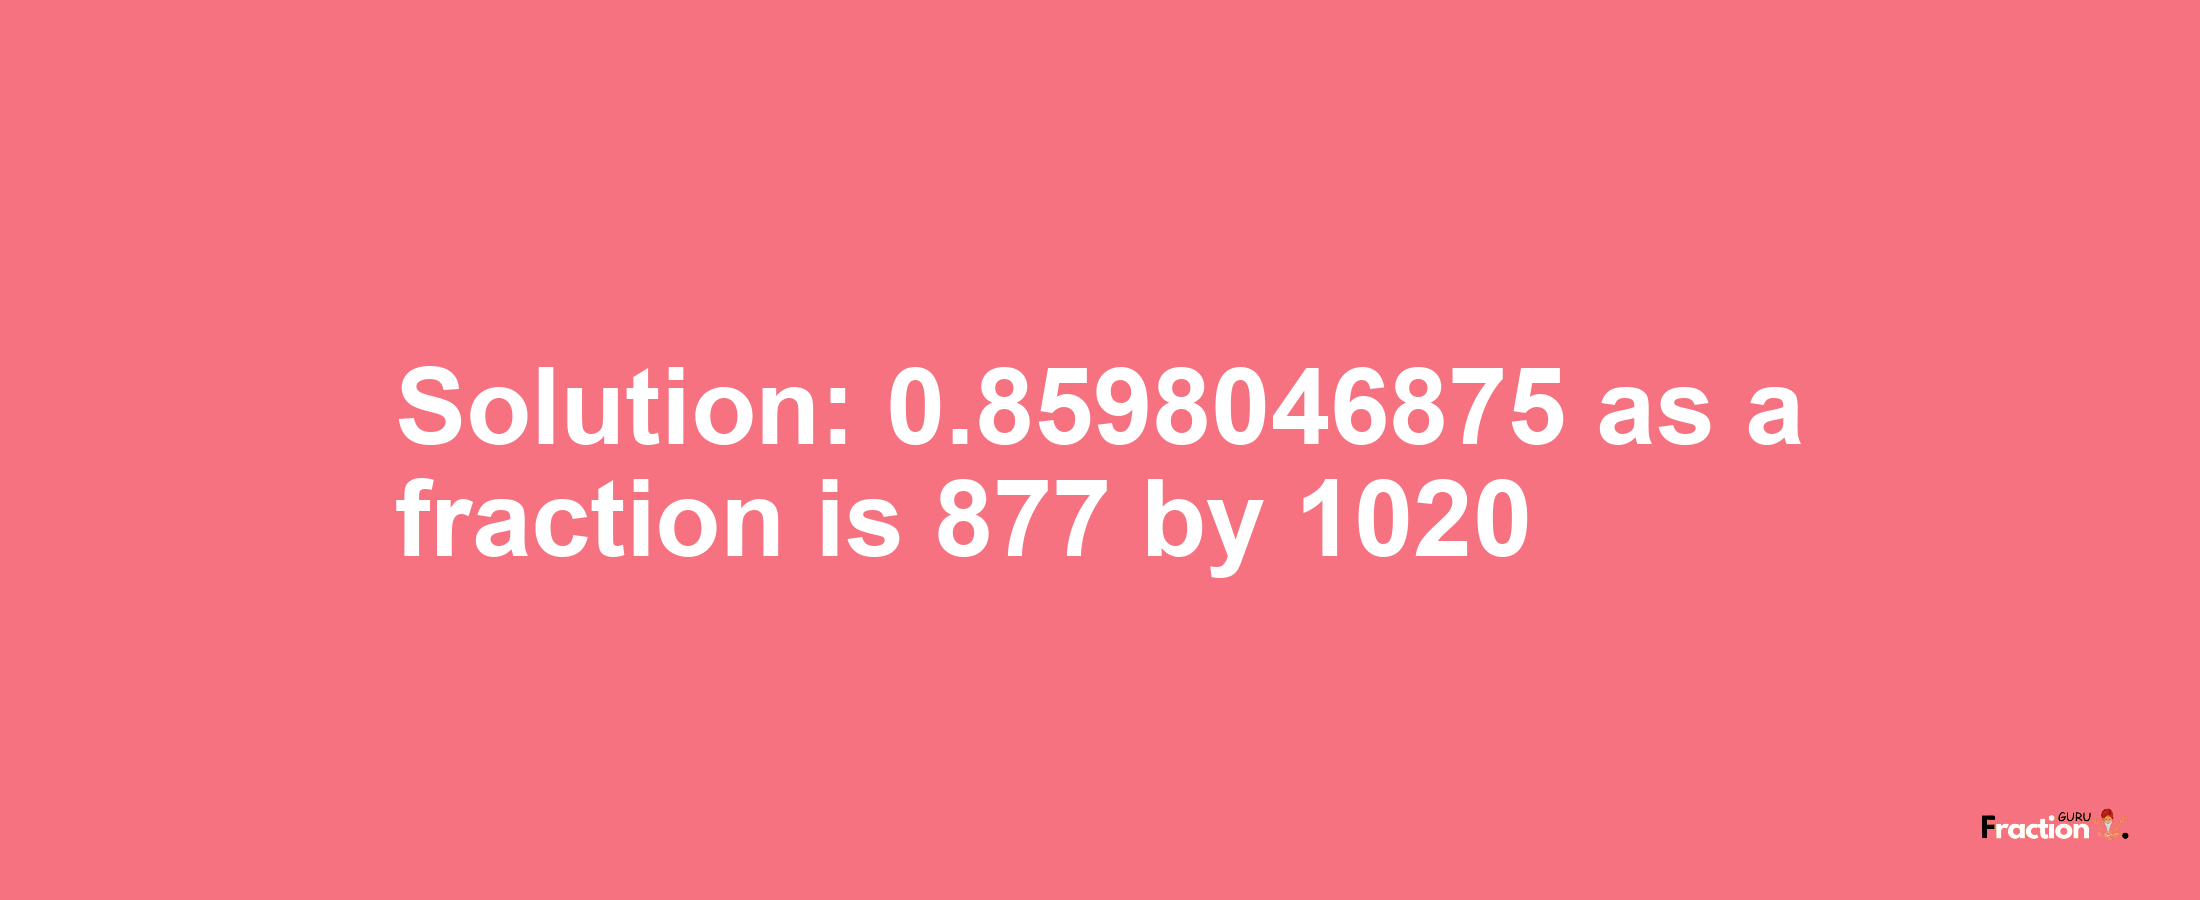 Solution:0.8598046875 as a fraction is 877/1020